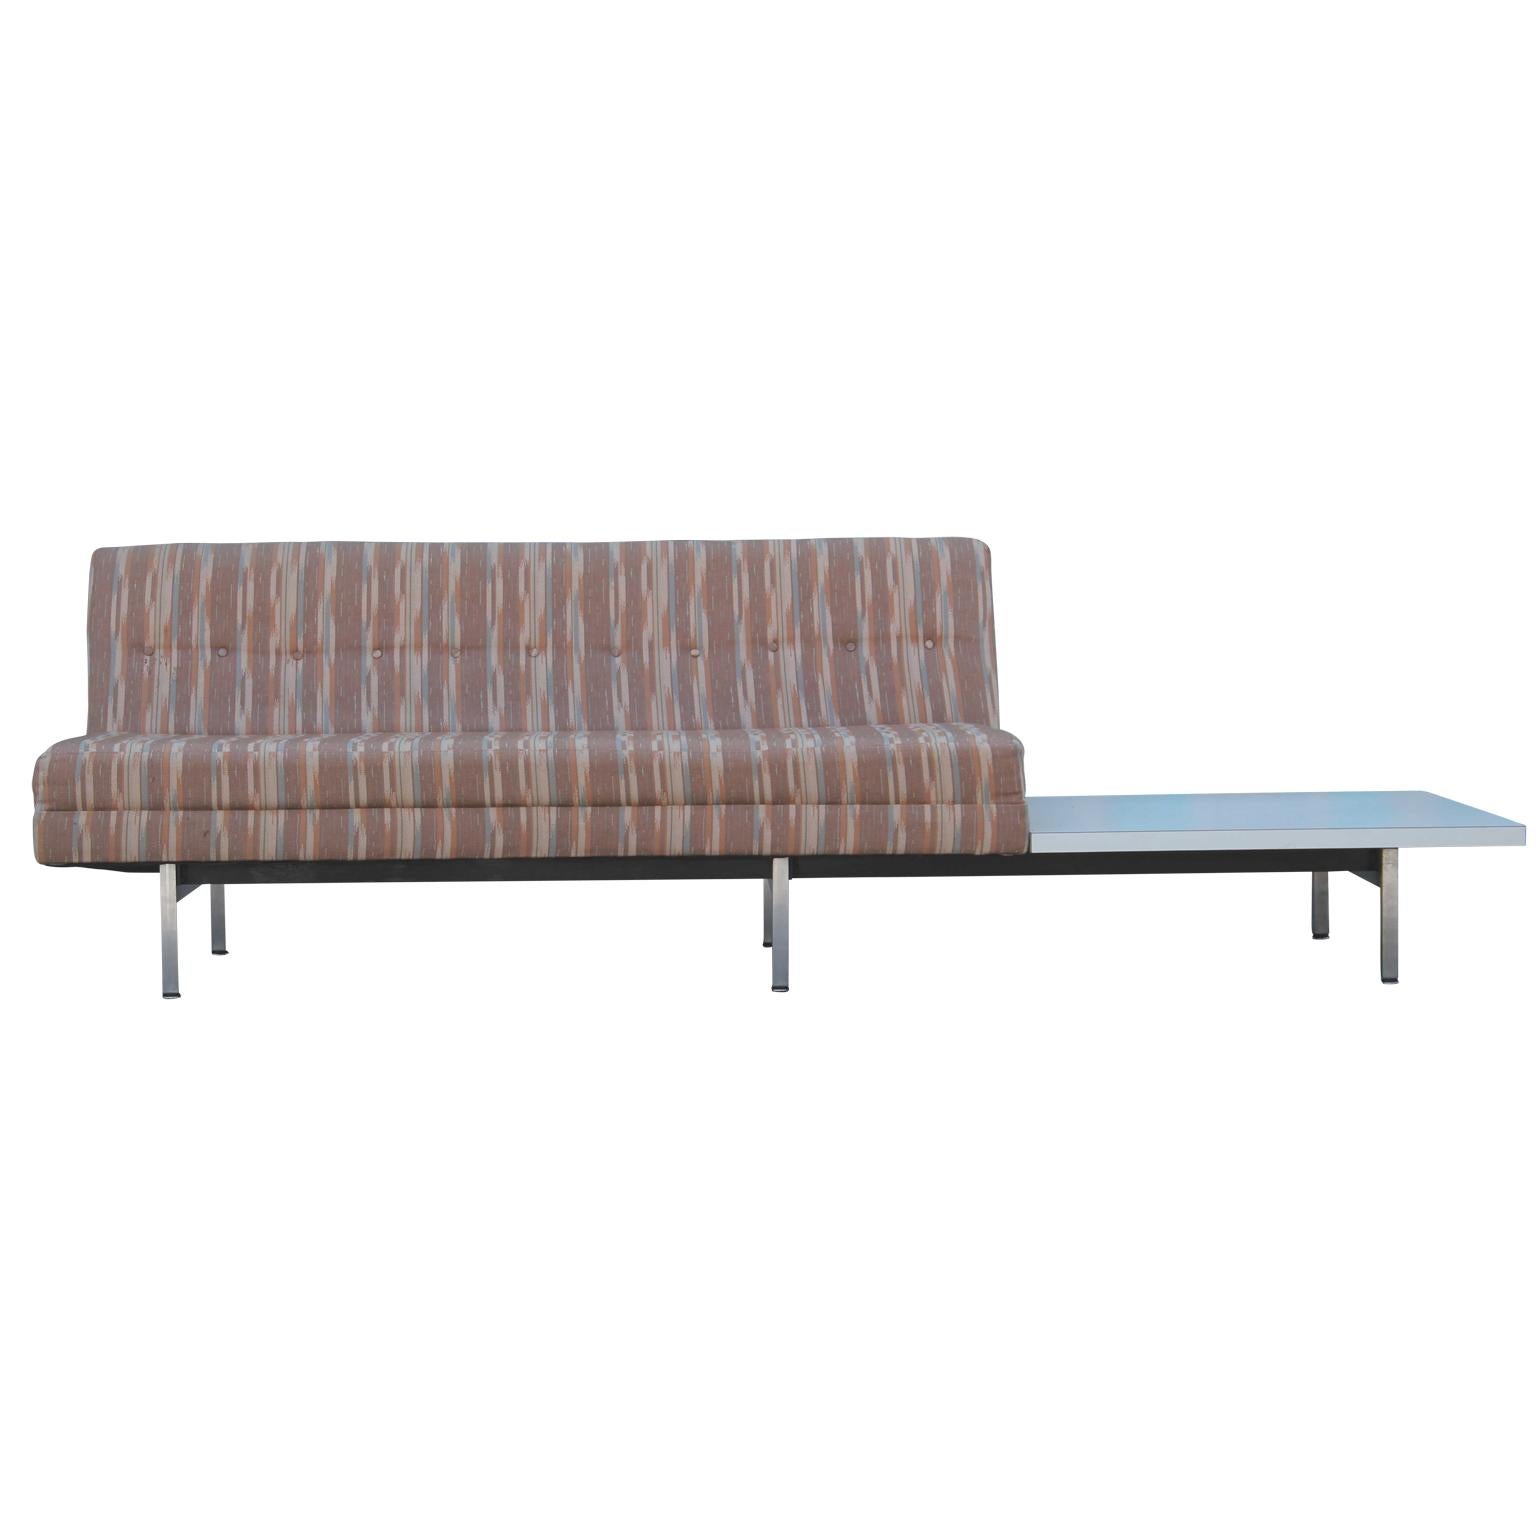 Modern George Nelson for Herman Miller sofa with a side table for their Modular Group line.